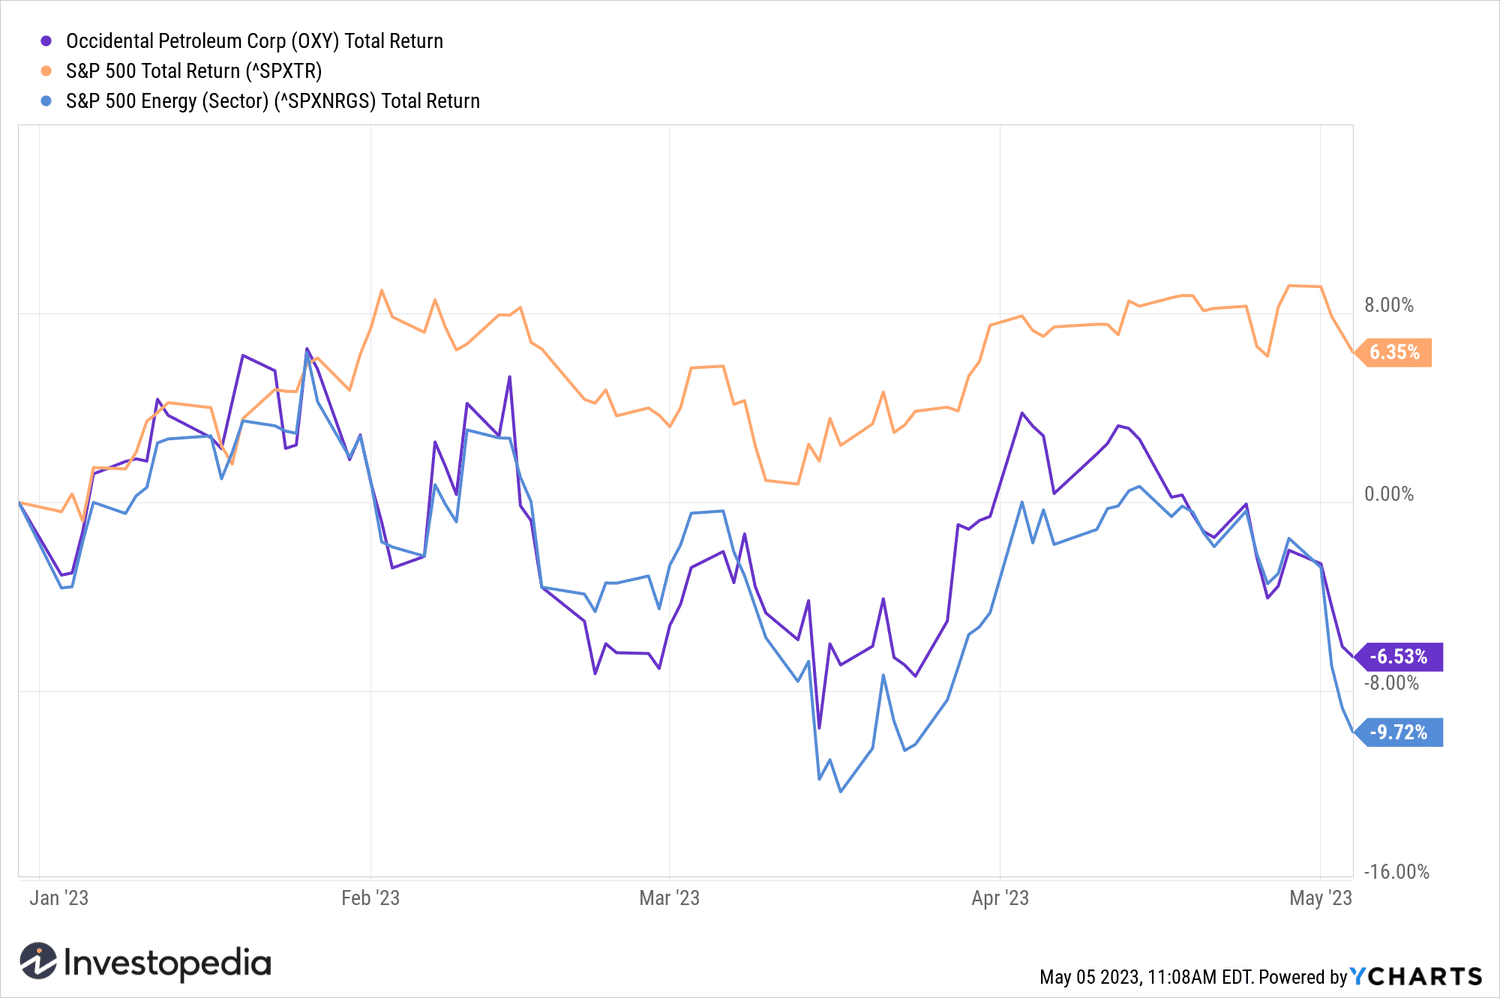 Year to date return of Occidental Petroleum stock, the S&P 500, and the S&P 500 Energy Sector (as of May 5, 2023).